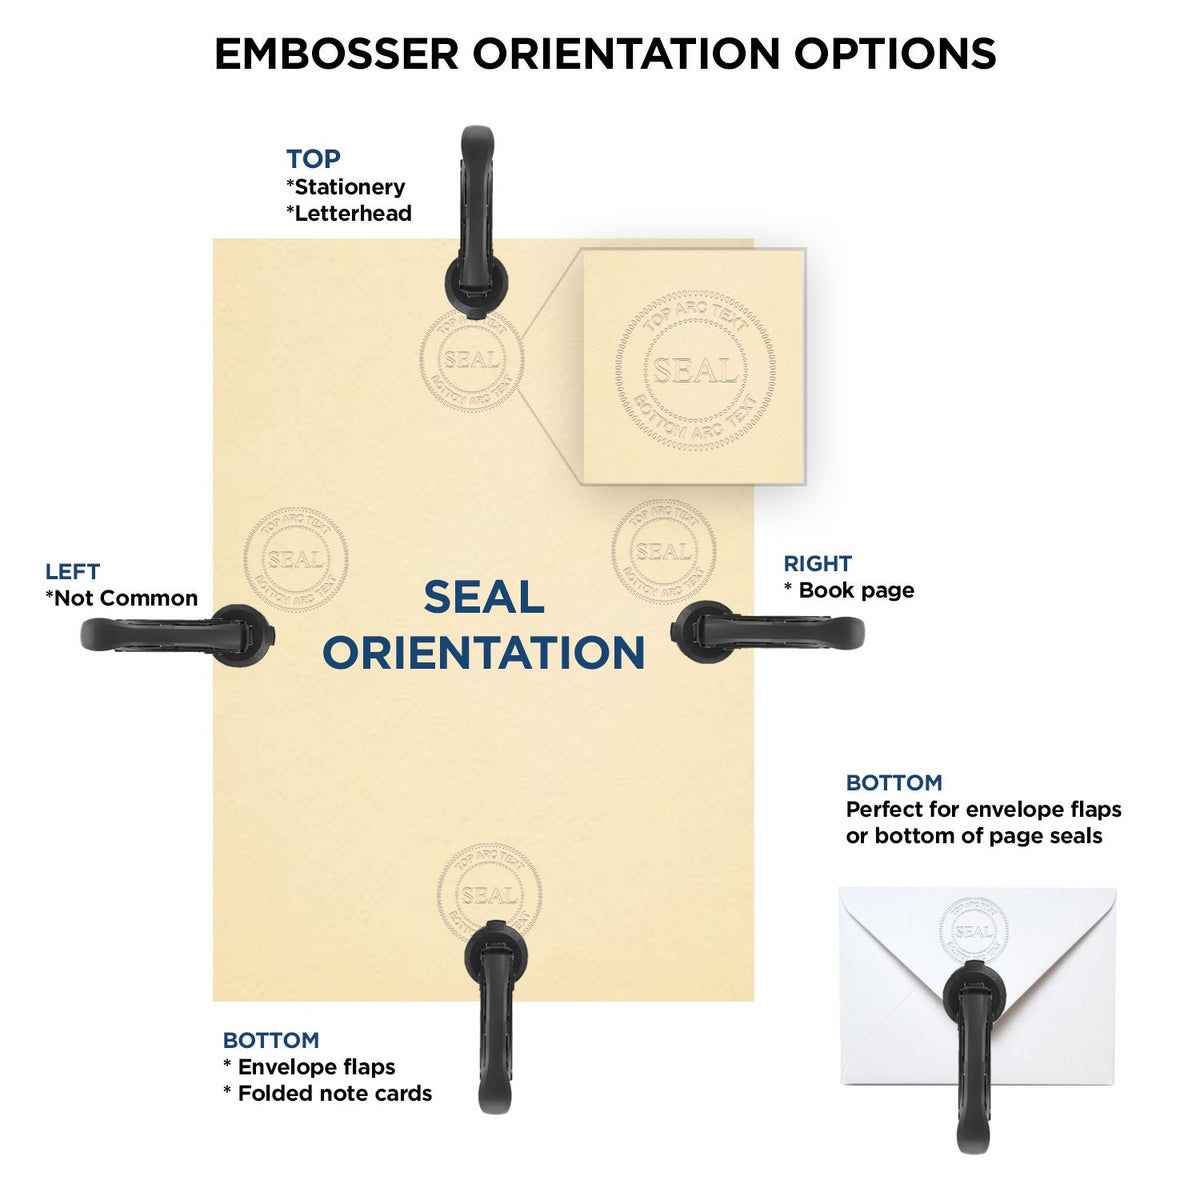 An infographic for the Handheld Massachusetts Professional Engineer Embosser showing embosser orientation, this is showing examples of a top, bottom, right and left insert.